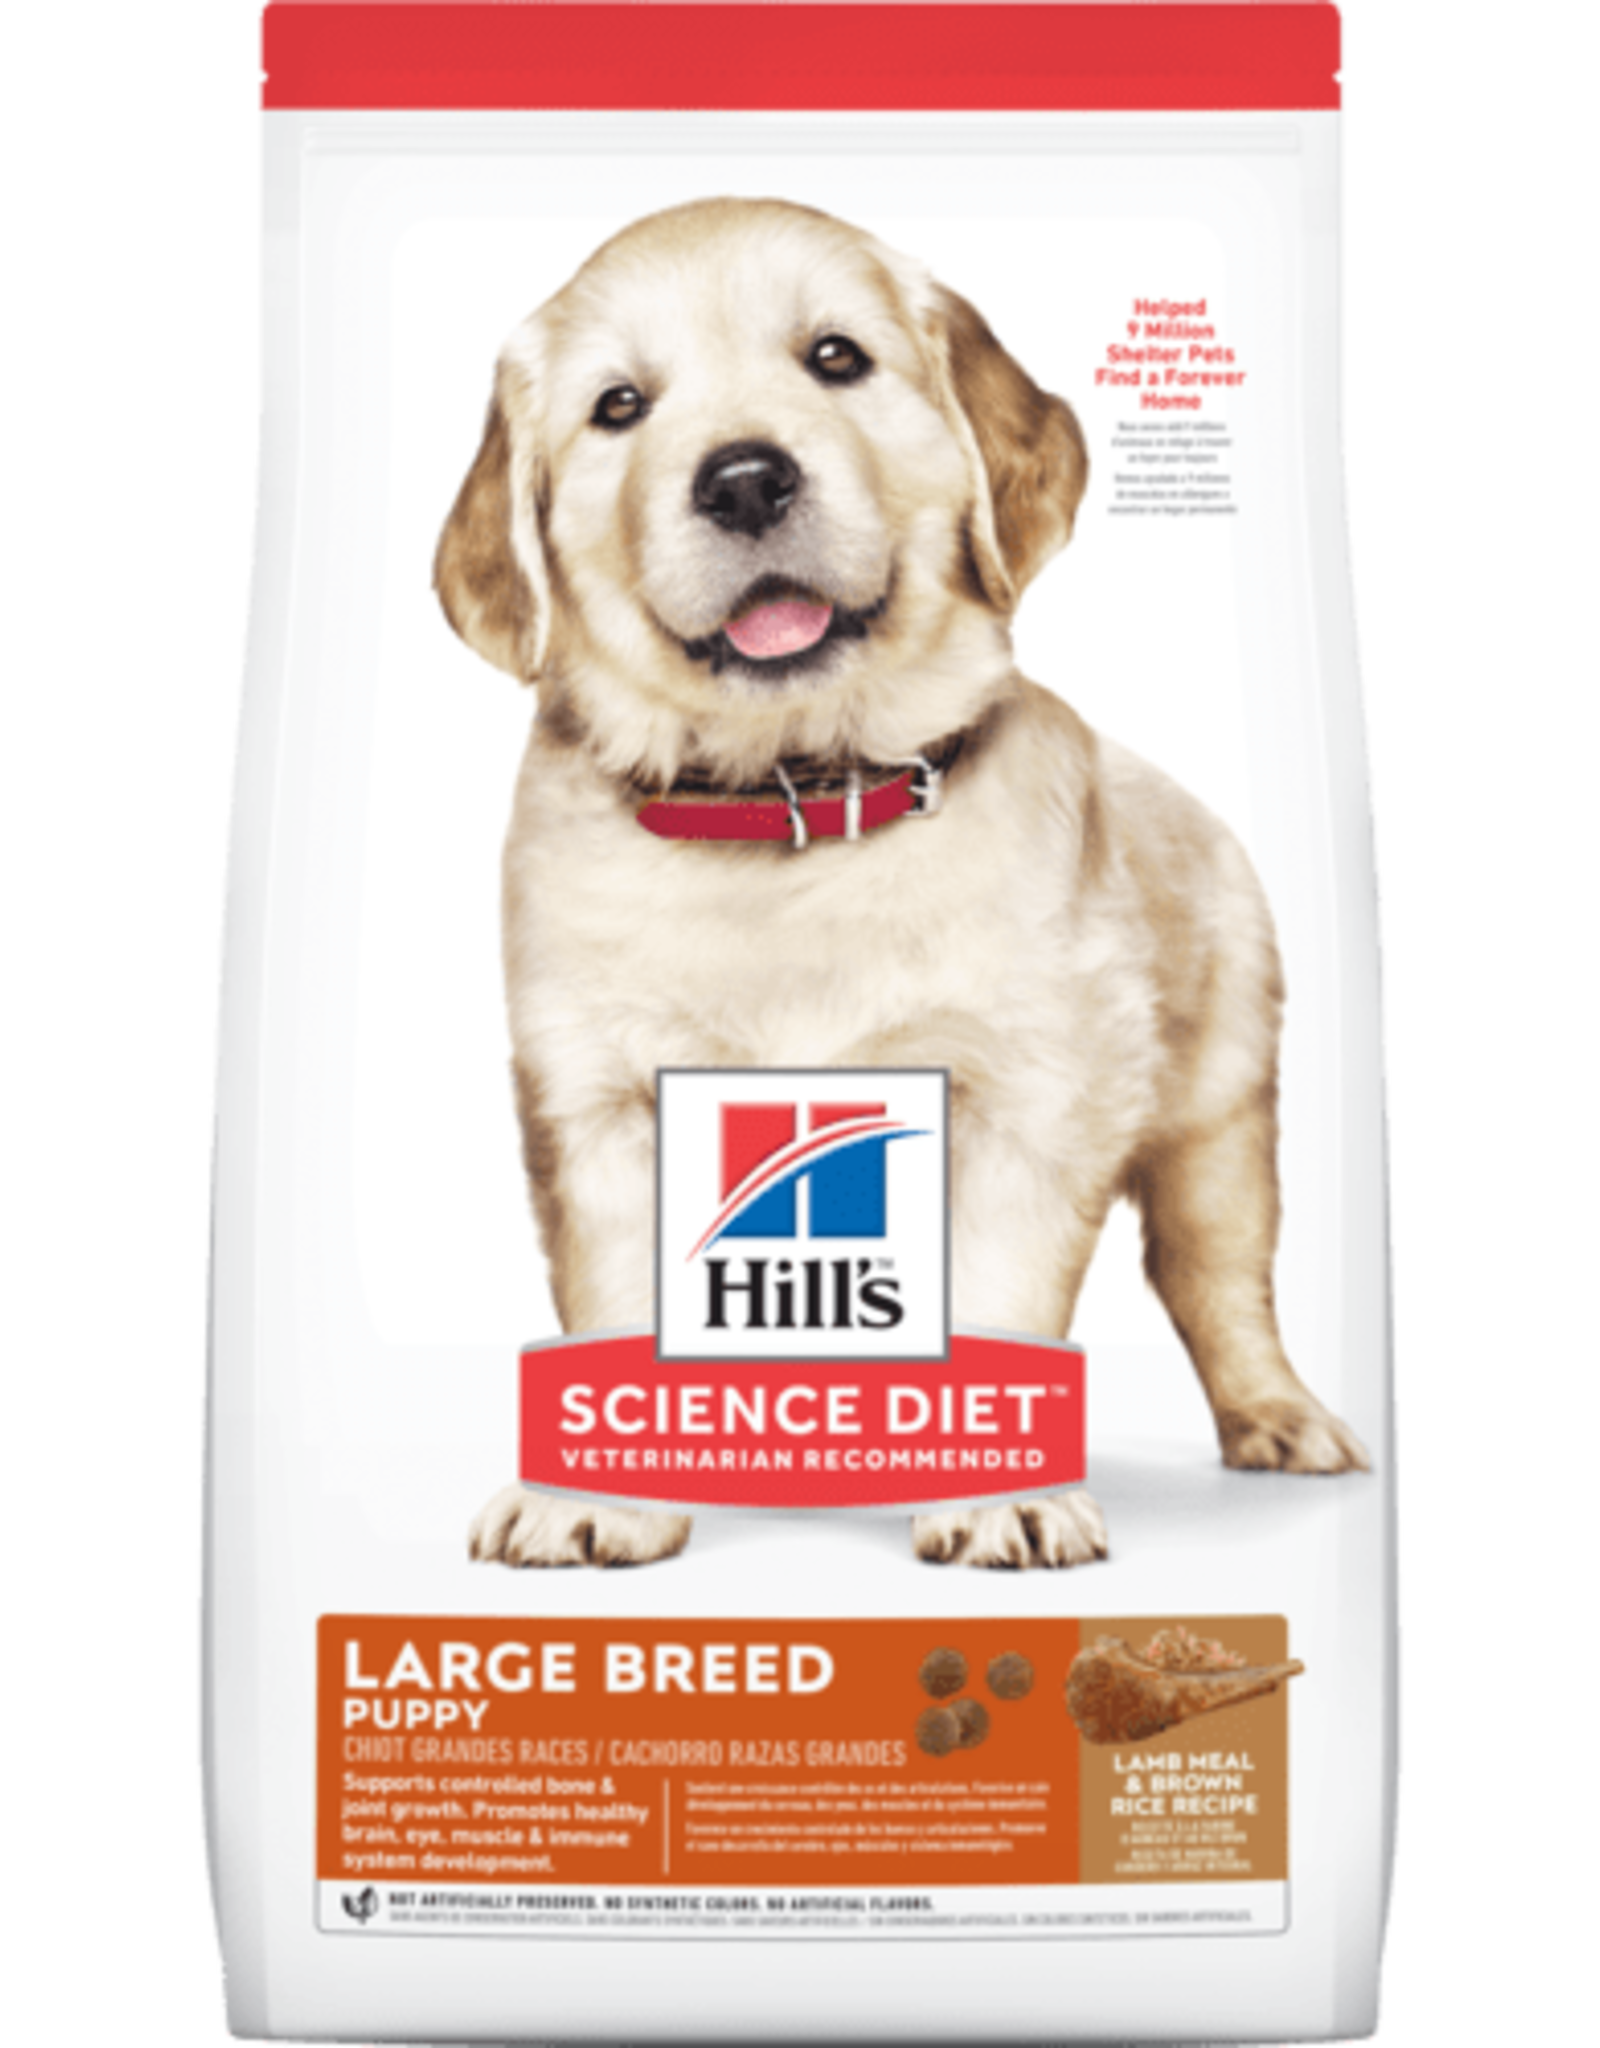 SCIENCE DIET HILL'S SCIENCE DIET CANINE PUPPY LAMB & RICE LARGE BREED 33LBS